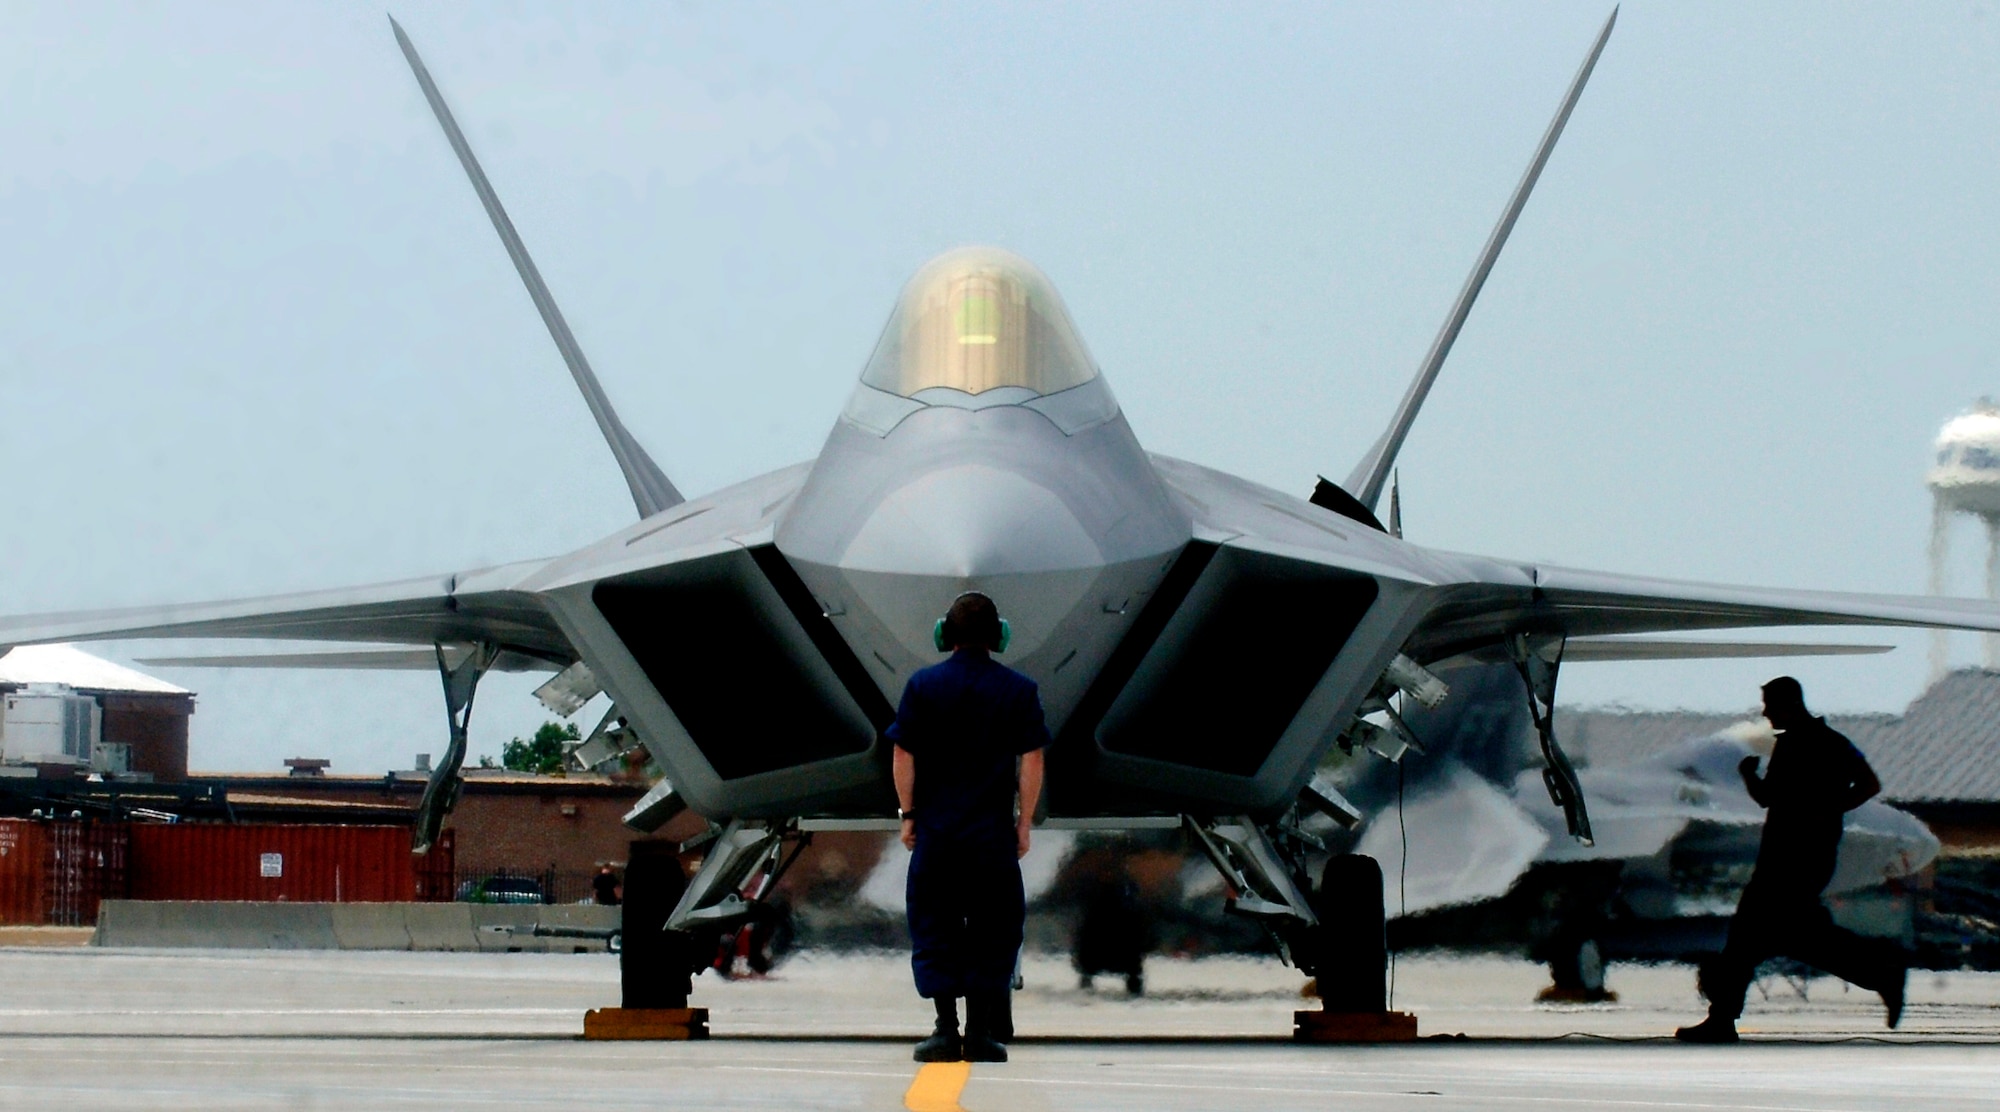 F-22A Raptor Demonstration Team aircraft maintainers prepare to launch out Maj. Paul "Max" Moga, the first F-22A Raptor demonstration team pilot, July 13. (U.S. Air Force photo/Senior Airman Christopher L. Ingersoll)